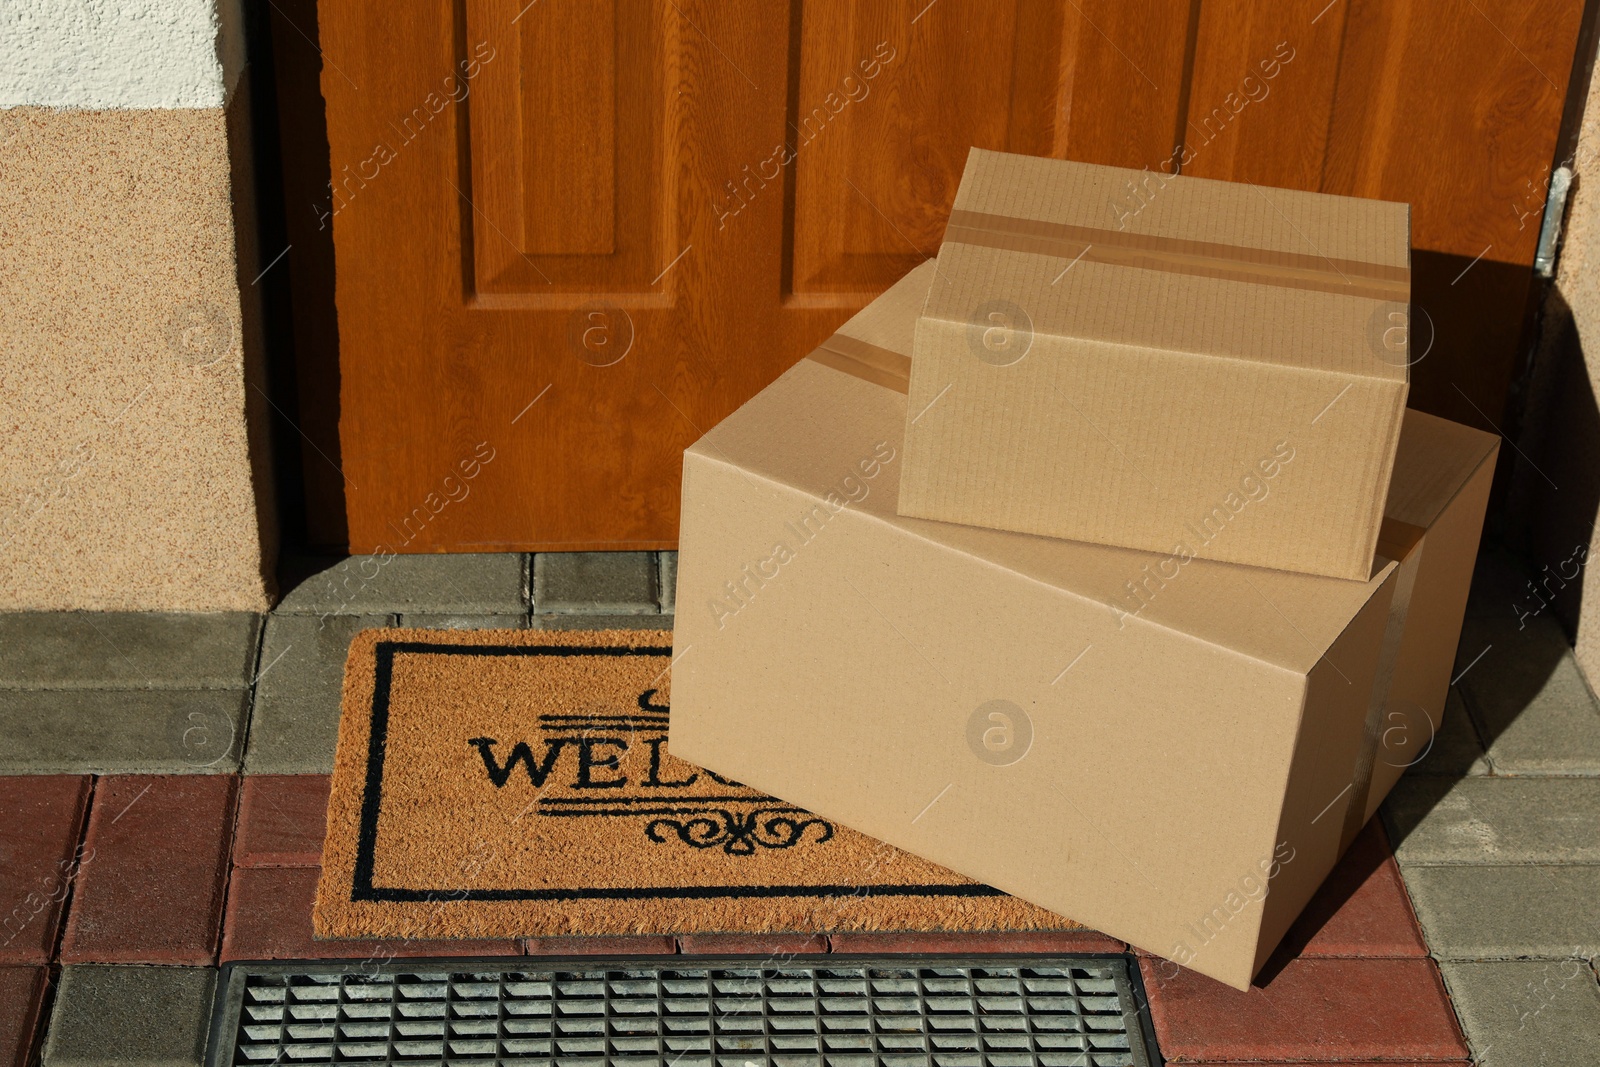 Photo of Parcels delivered on mat near front door